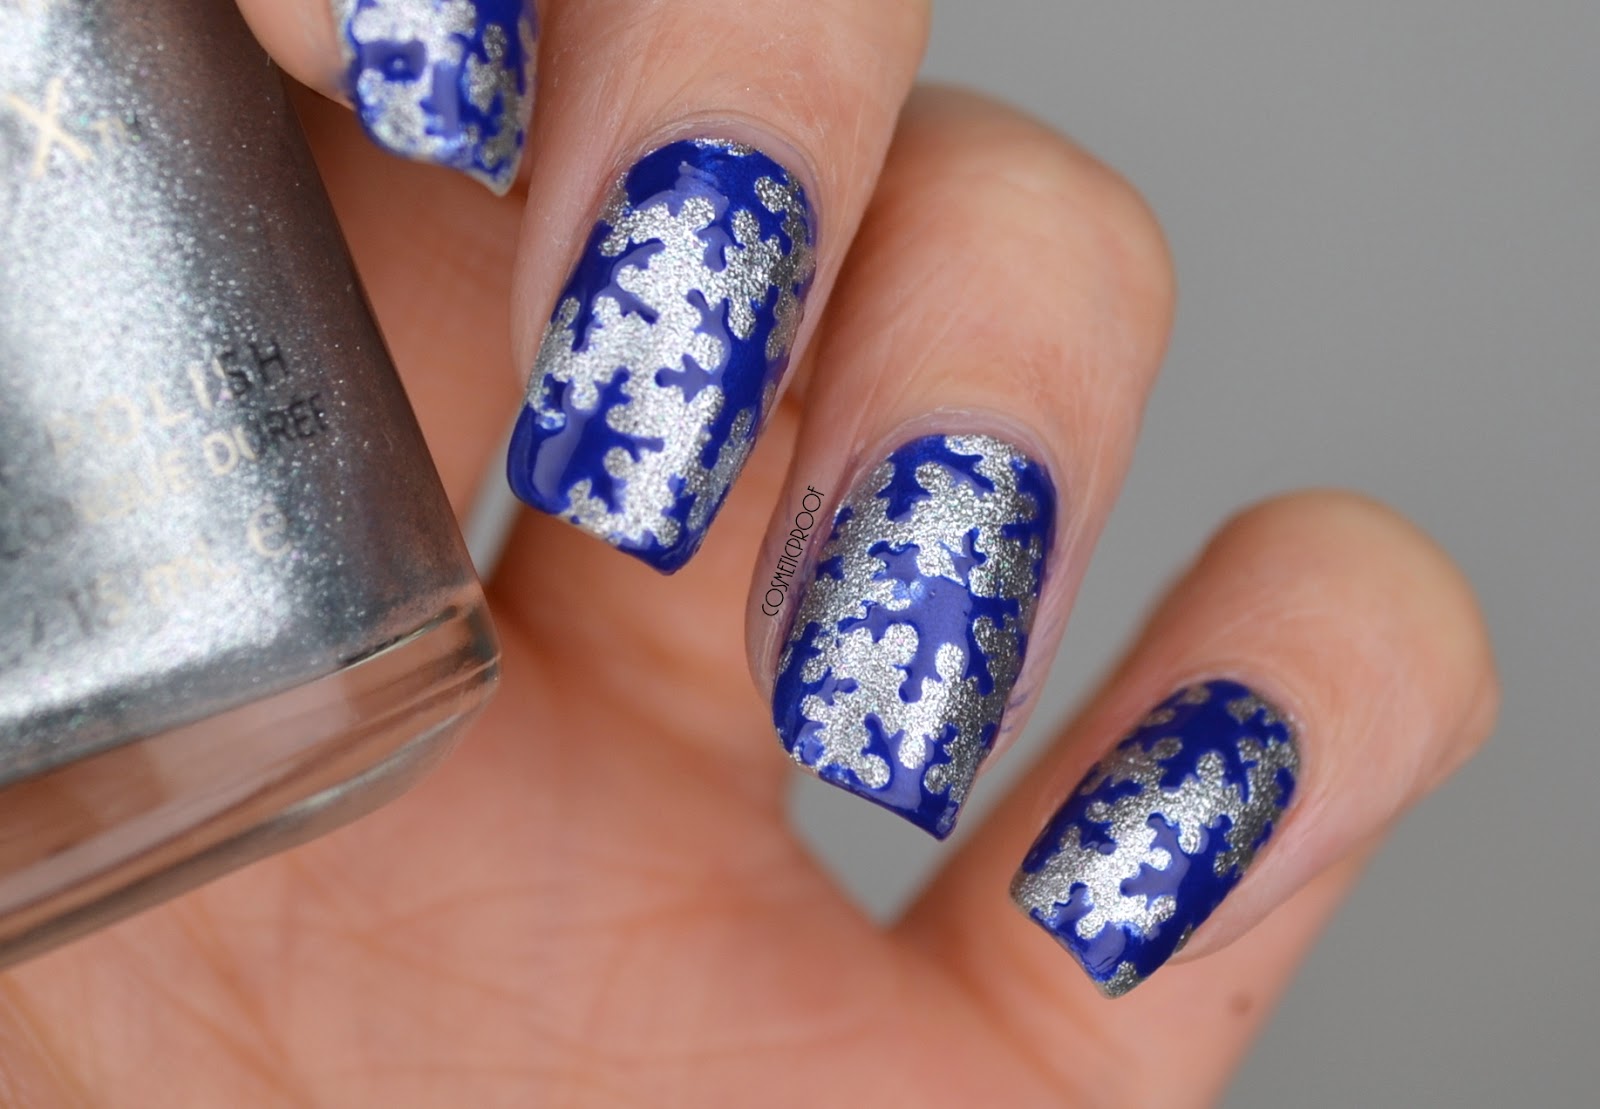 10. Step by Step Snowflake Nail Art for the Holidays - wide 3